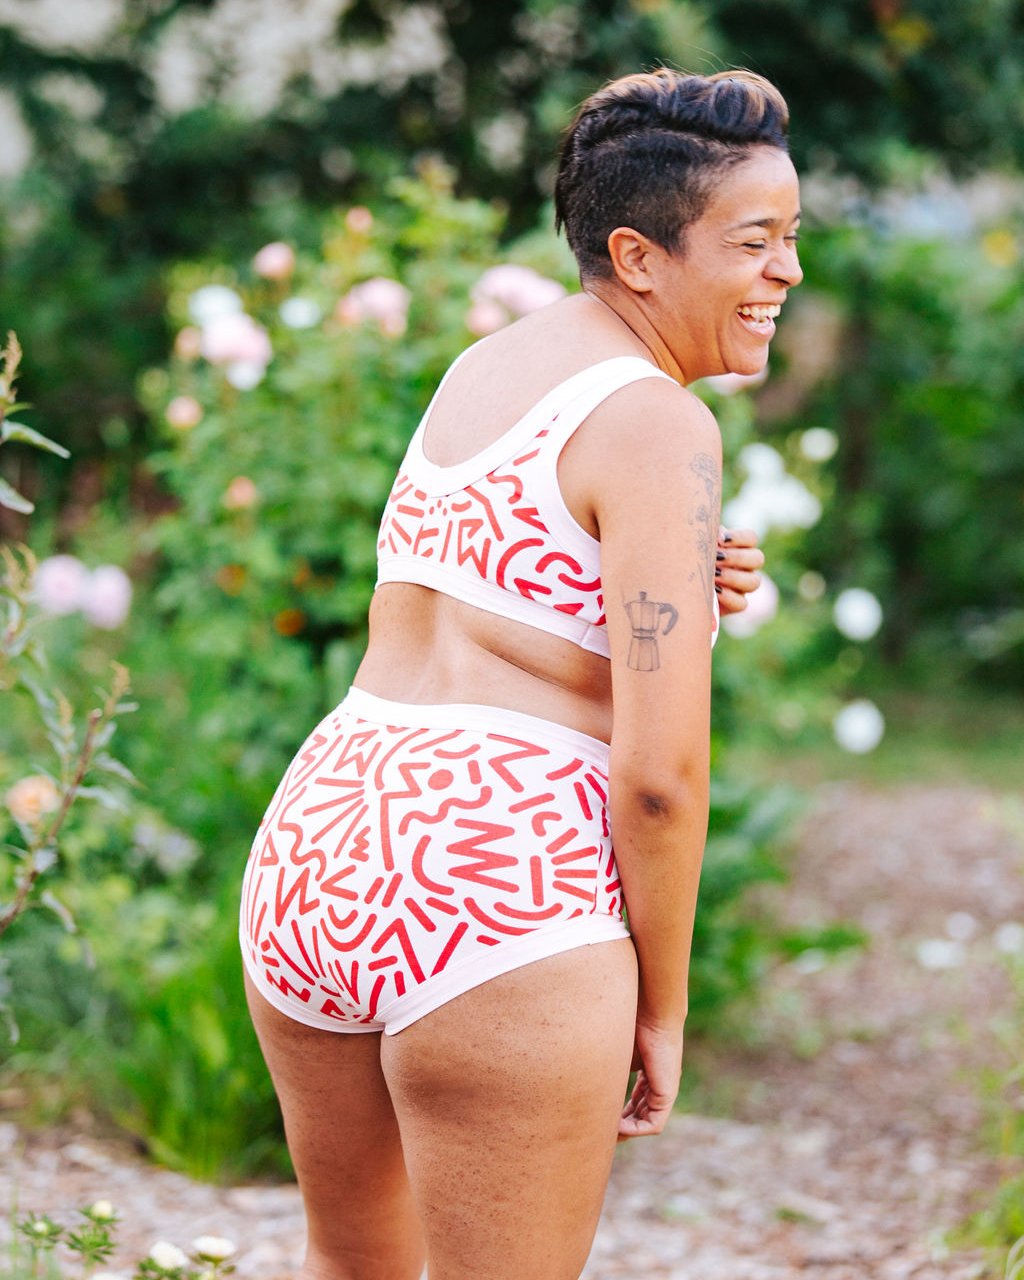 model smiling wearing Thunderpants Organic Cotton Original style underwear in our Energy Vibes print: prink with large red squggiles.